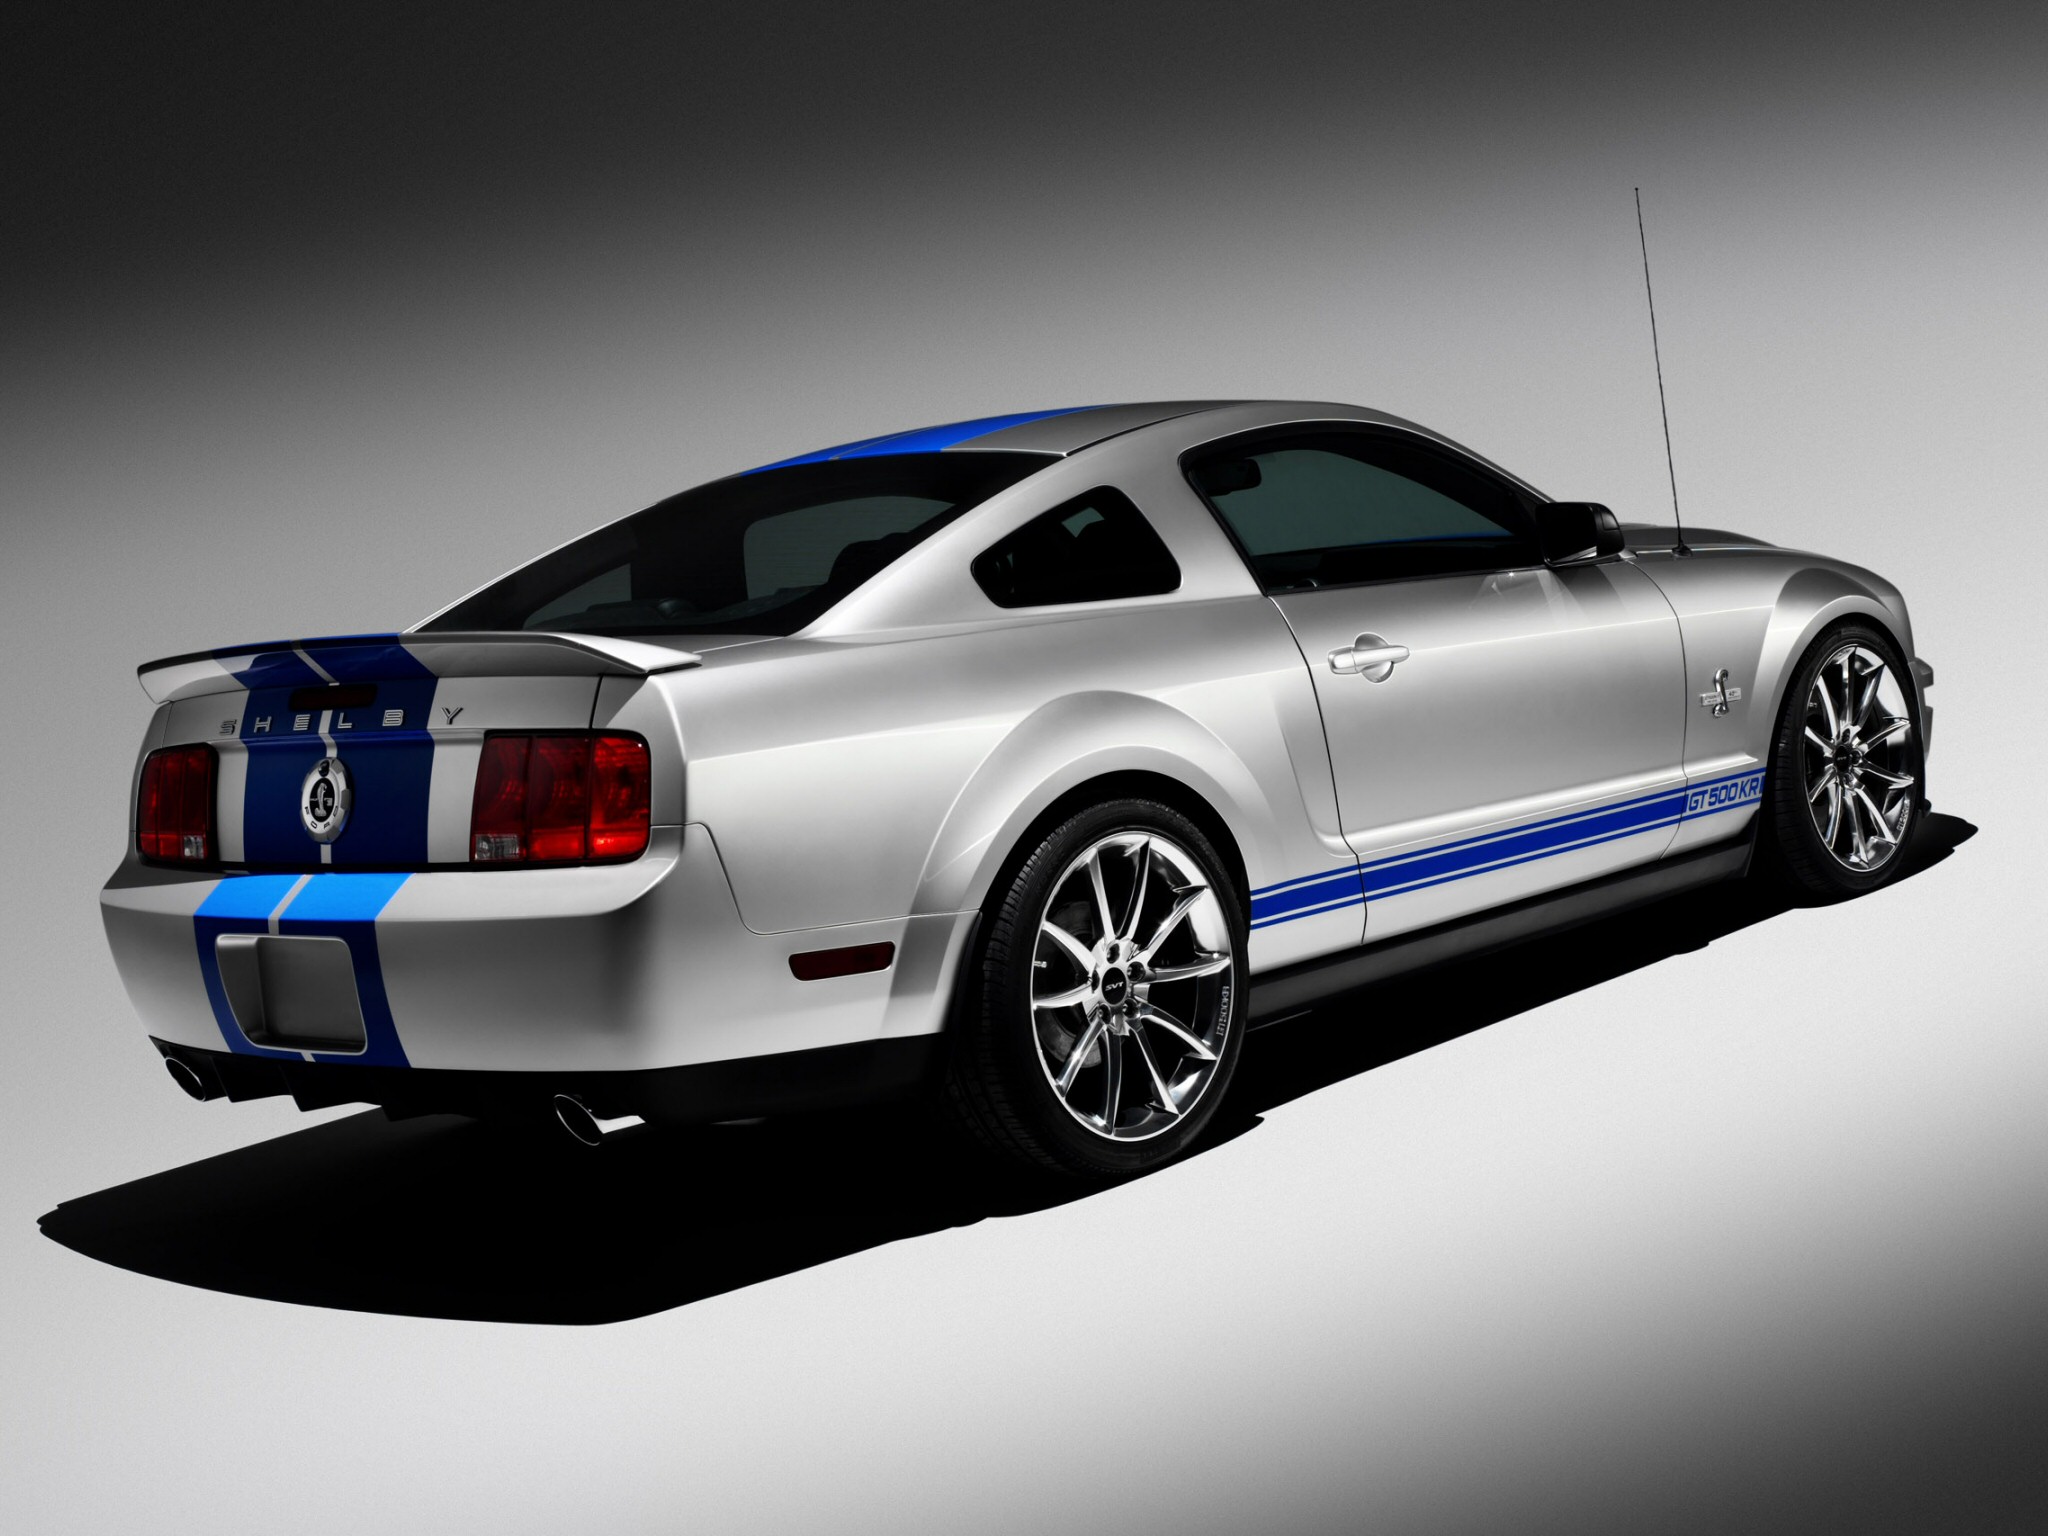 2008, Shelby, Gt500 kr, Gt500, Ford, Mustang, Muscle, Classic, Ds Wallpaper